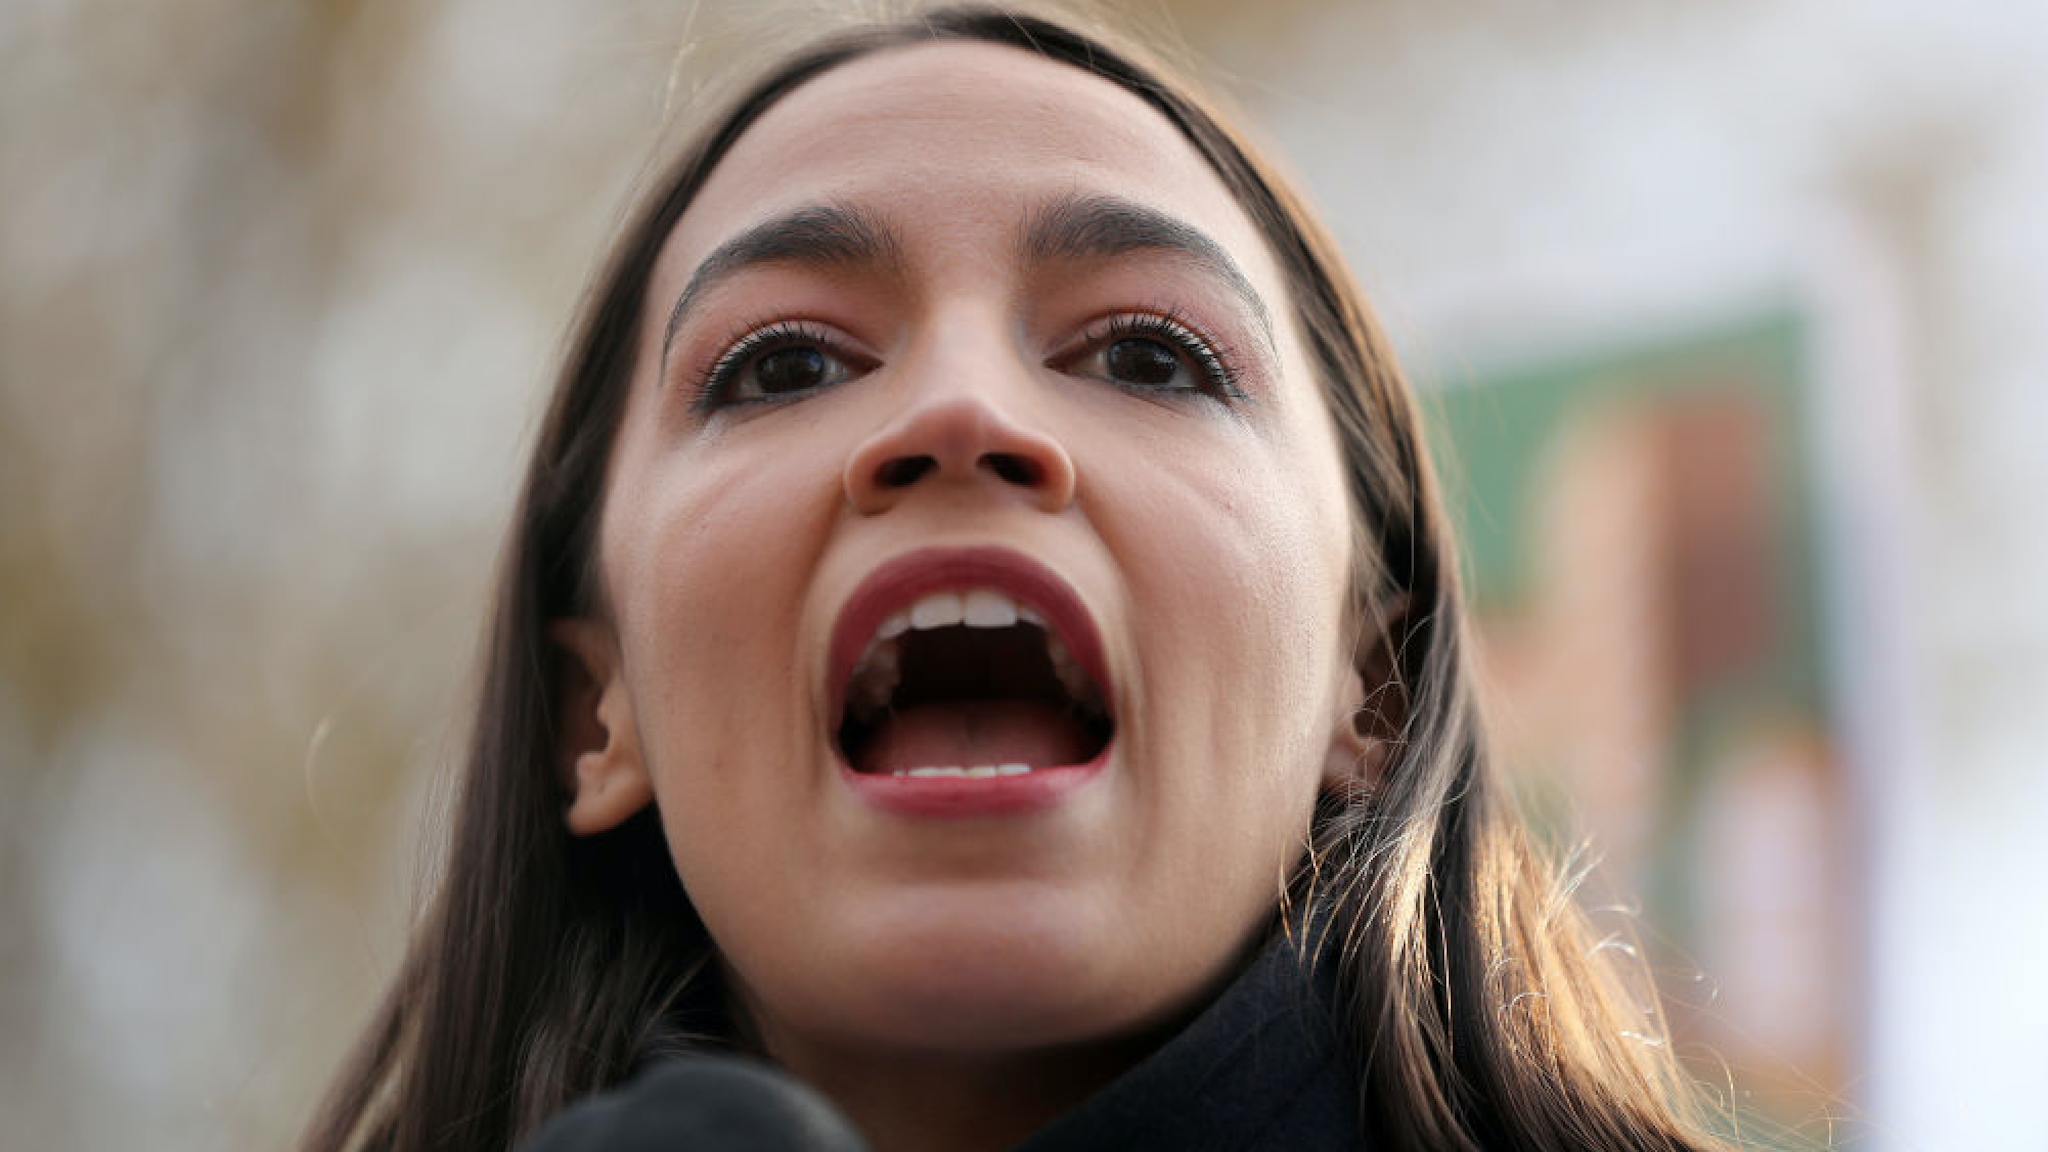 Rep. Alexandria Ocasio-Cortez (D-NY) speaks during a news conference to introduce legislation to transform public housing as part of her Green New Deal outside the U.S. Capitol November 14, 2019 in Washington, DC.